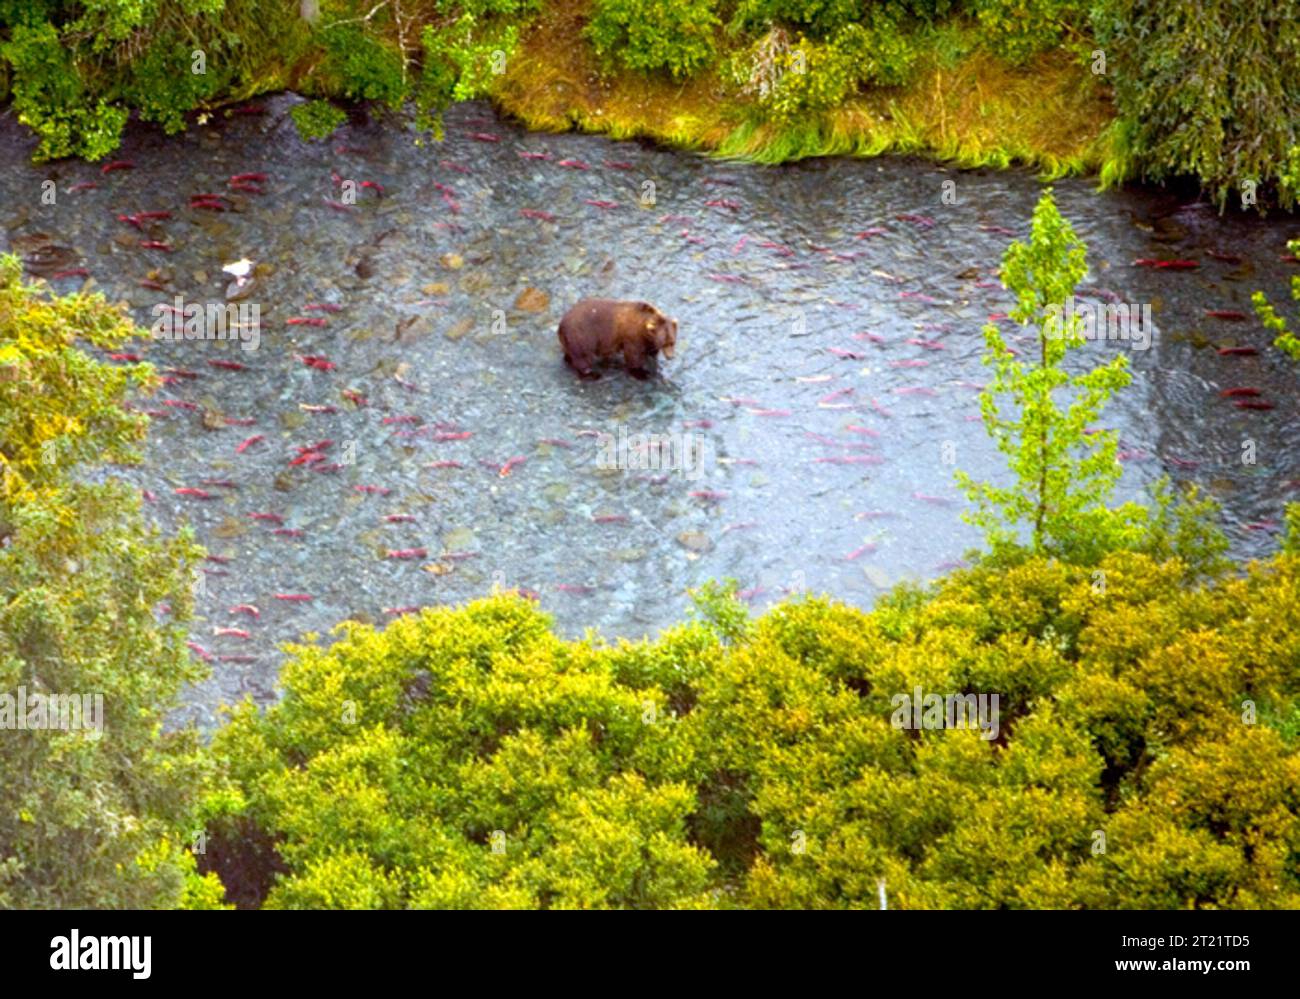 Aerial view of a brown bear in the Upper Russian River surrounded by fish. Subjects: Aerial photography; Wildlife Refuges; Mammals; Rivers and streams; Fishes. Location: Alaska. Fish and Wildlife Service Site: KENAI NATIONAL WILDLIFE REFUGE.  . 1998 - 2011. Stock Photo